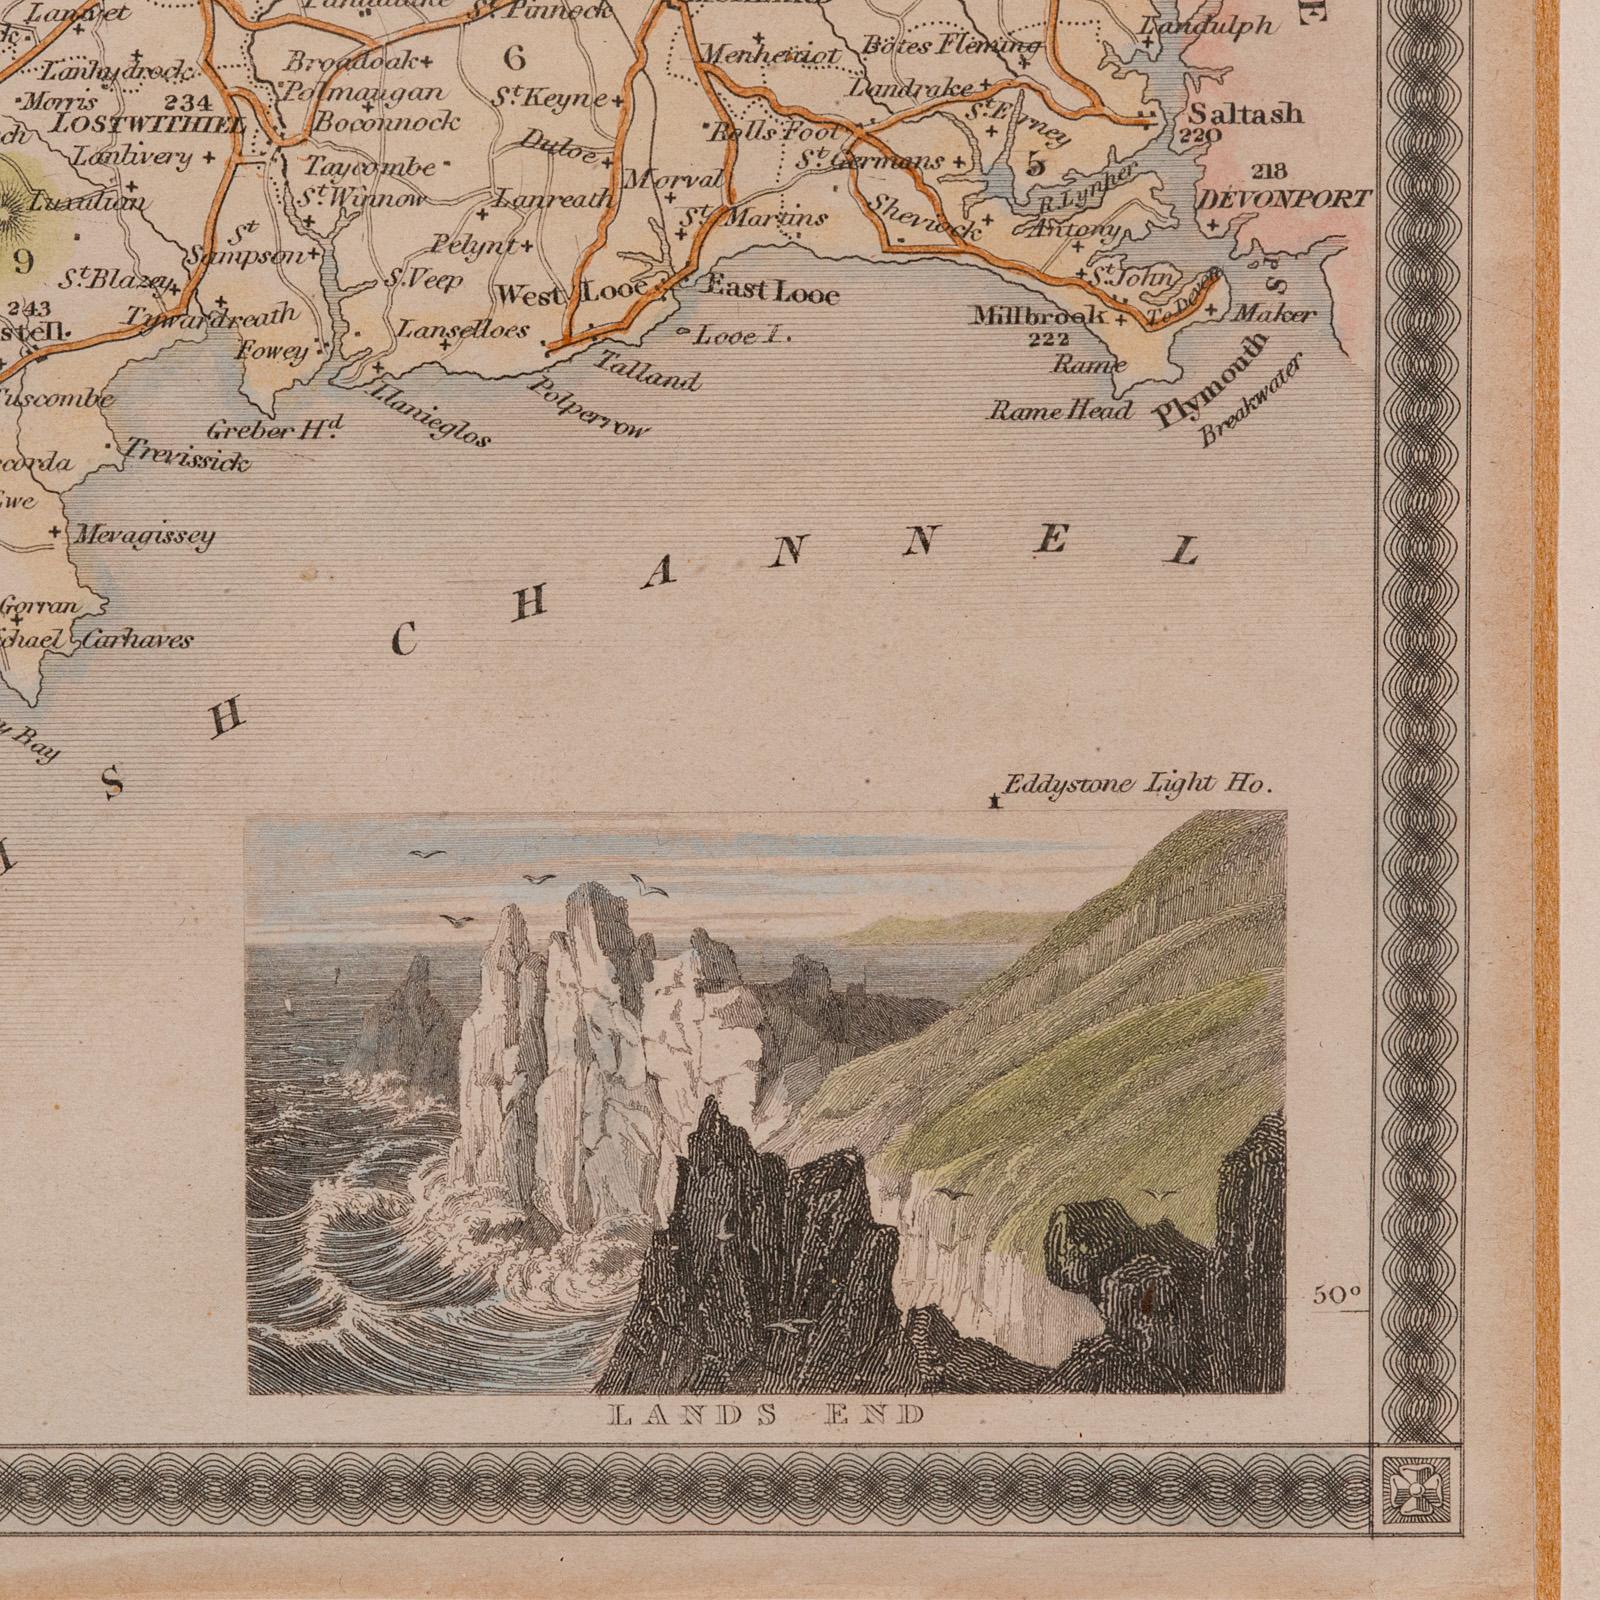 Antique Lithography Map, Cornwall, English Framed Engraving, Cartography, C.1850 In Good Condition For Sale In Hele, Devon, GB